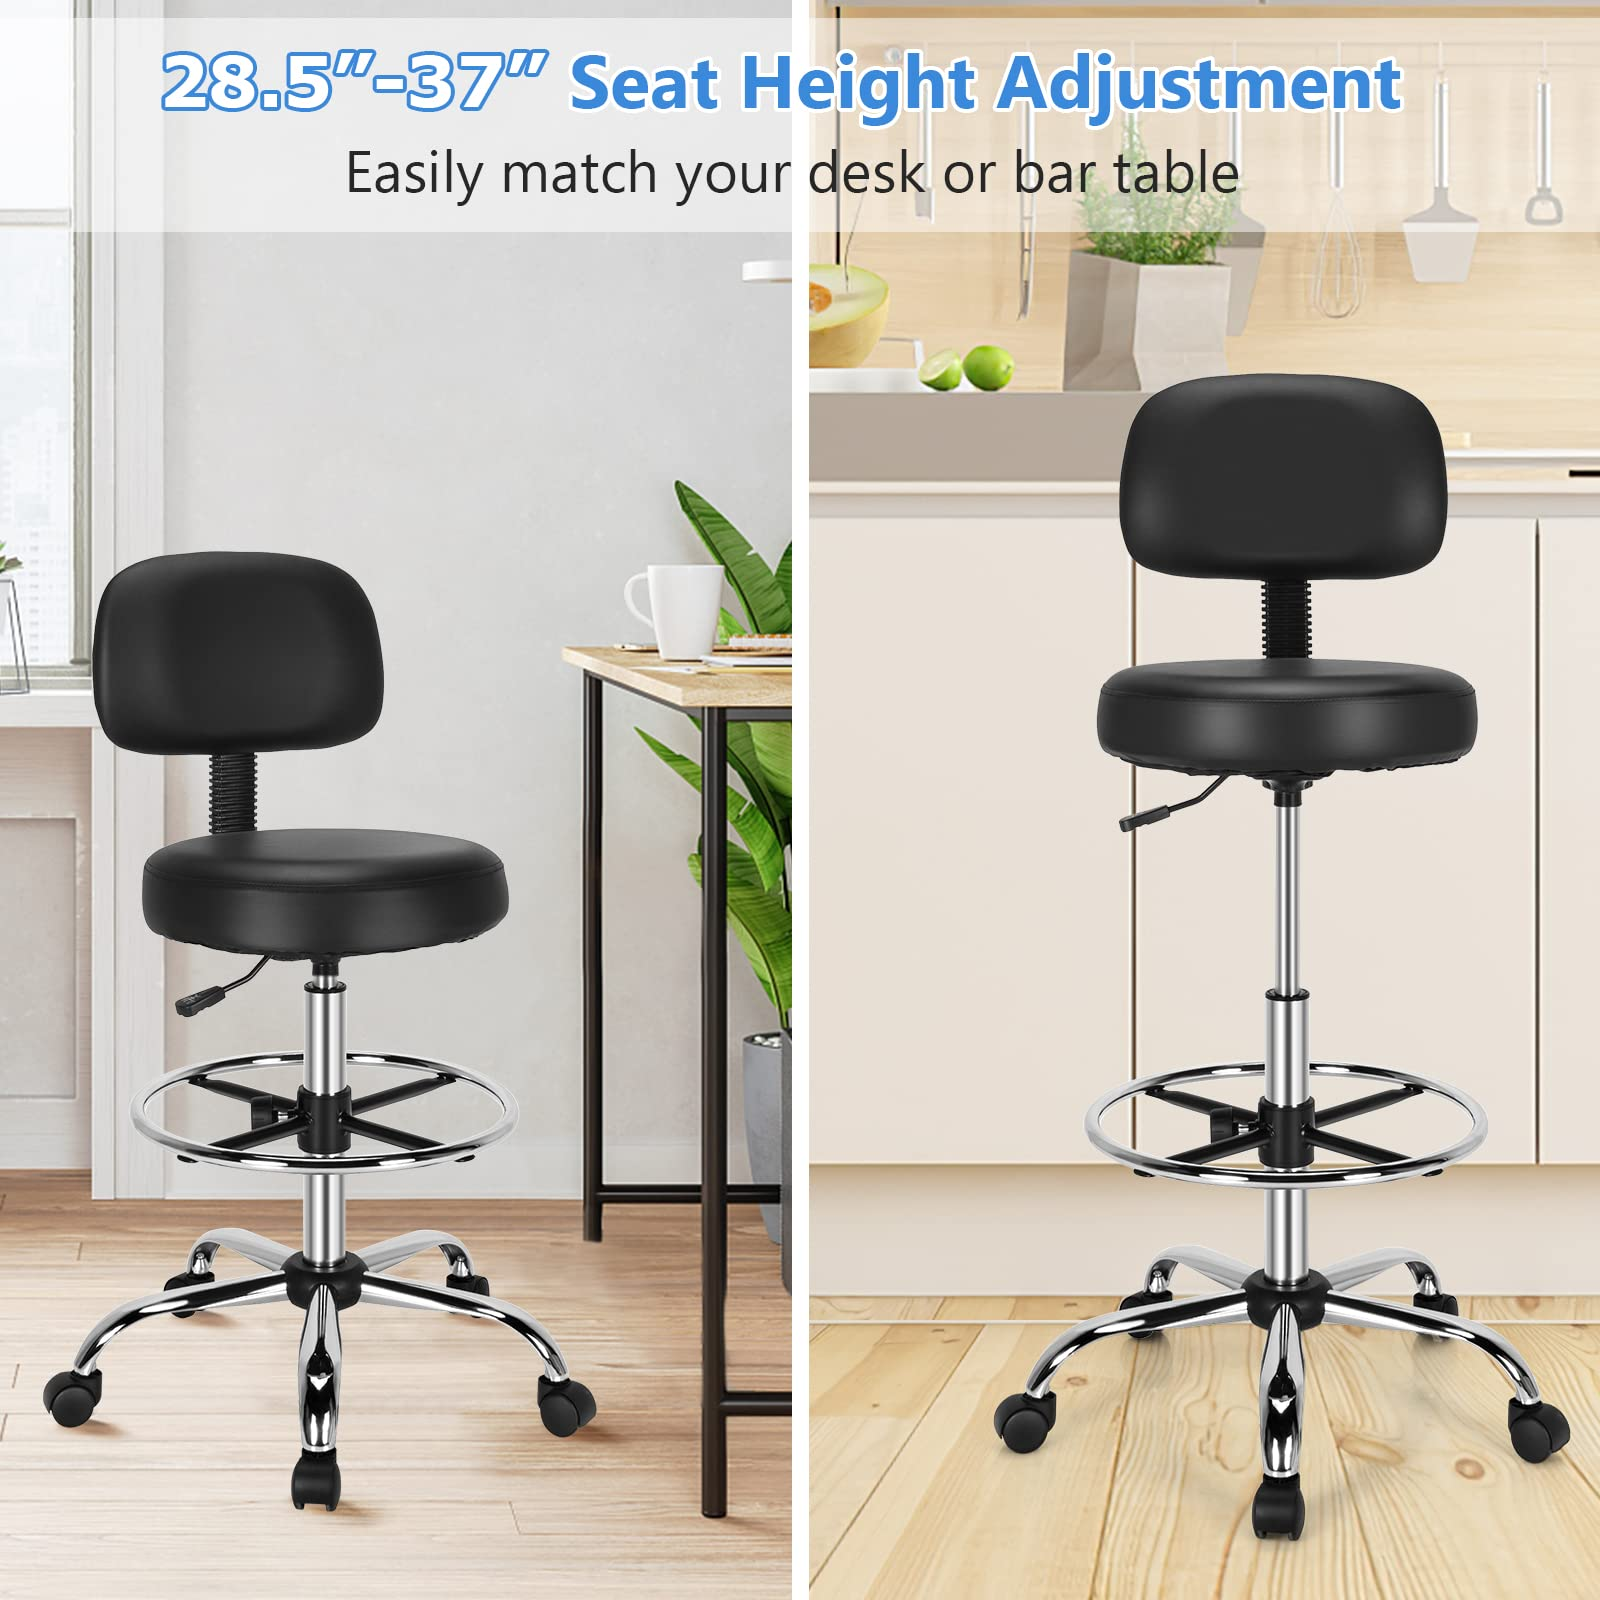 Giantex PU Leather Drafting Chair, Tall Office Chair